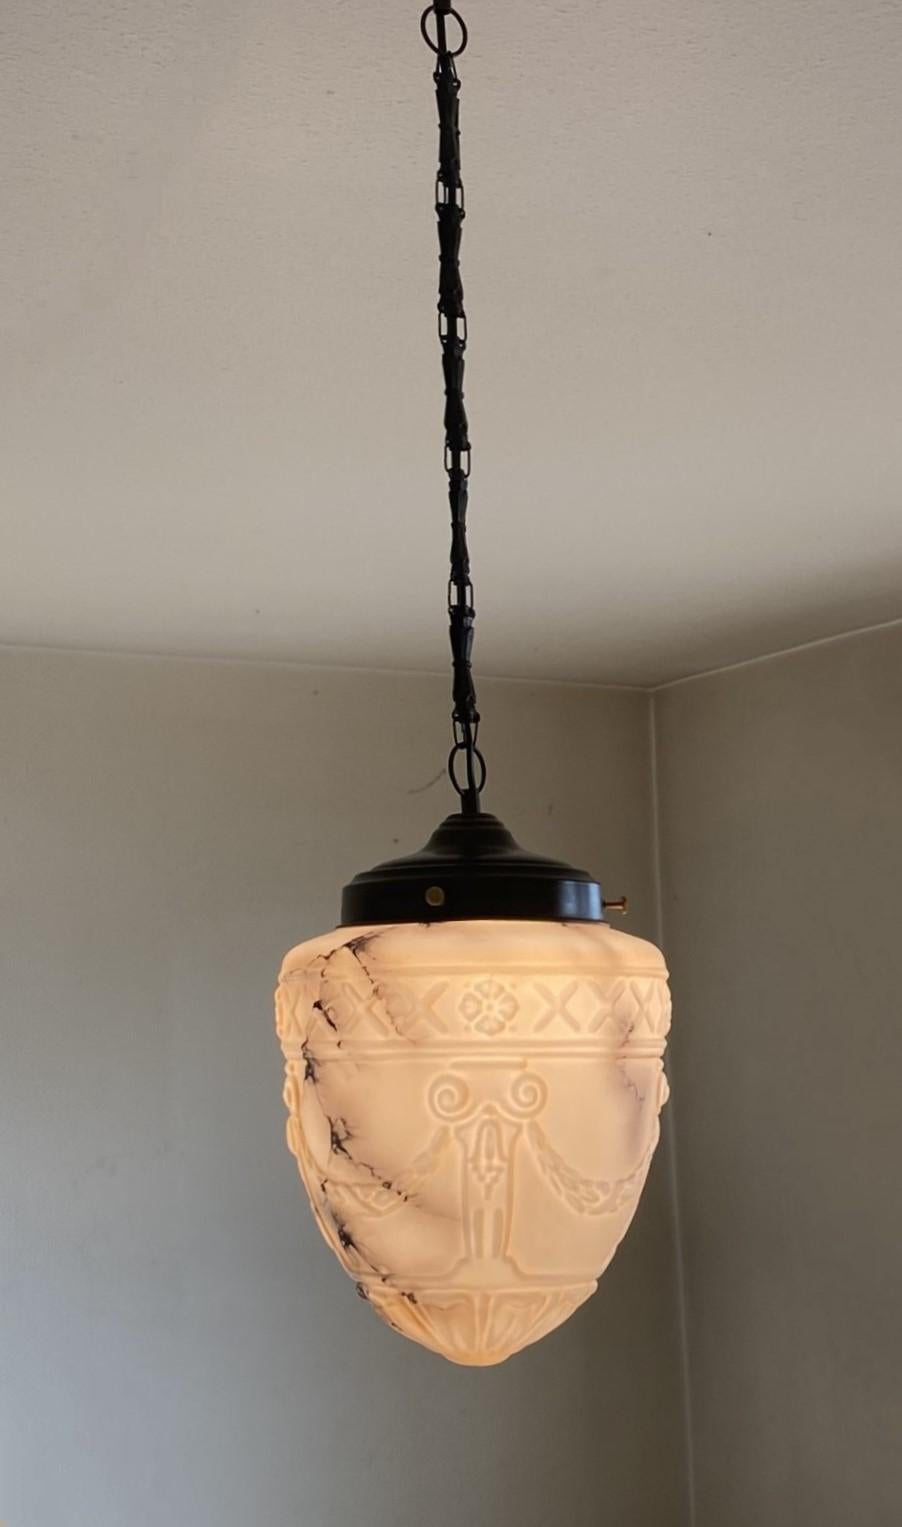 French Art Deco Alabaster Looking High-Releaf Glass Pendant Lantern, 1920-1930 For Sale 6